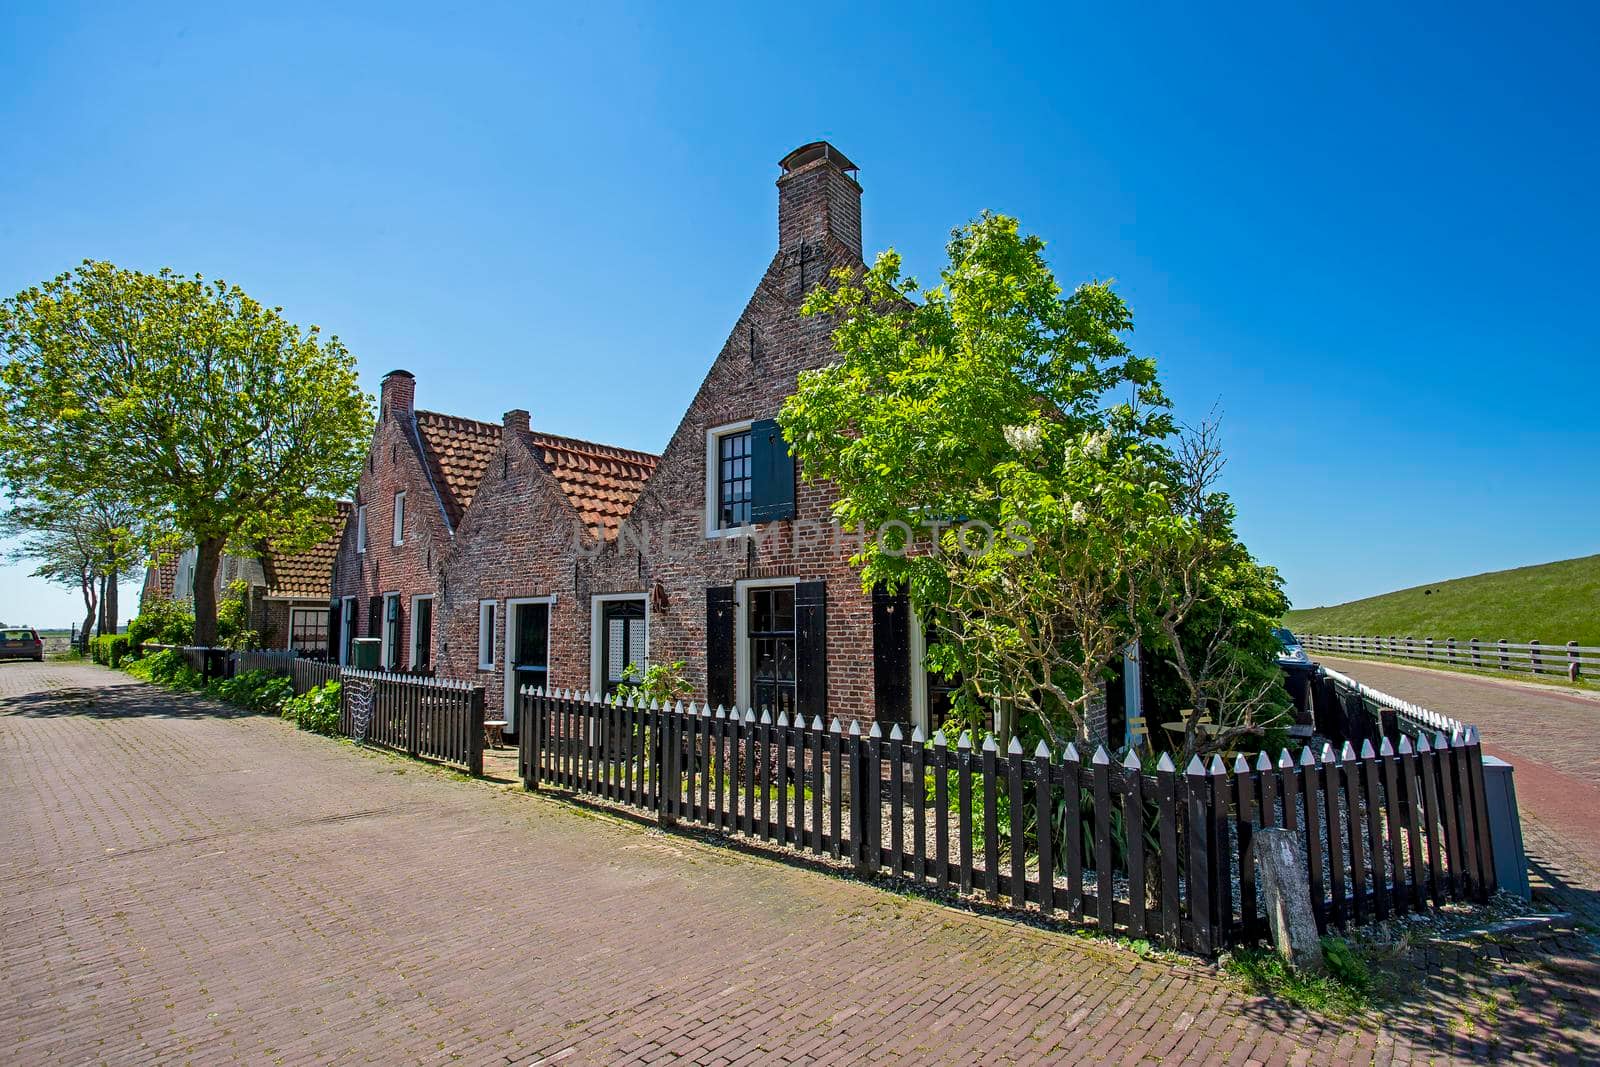 Traditional medieval houses in the village Moddergat in Friesland the Netherlands